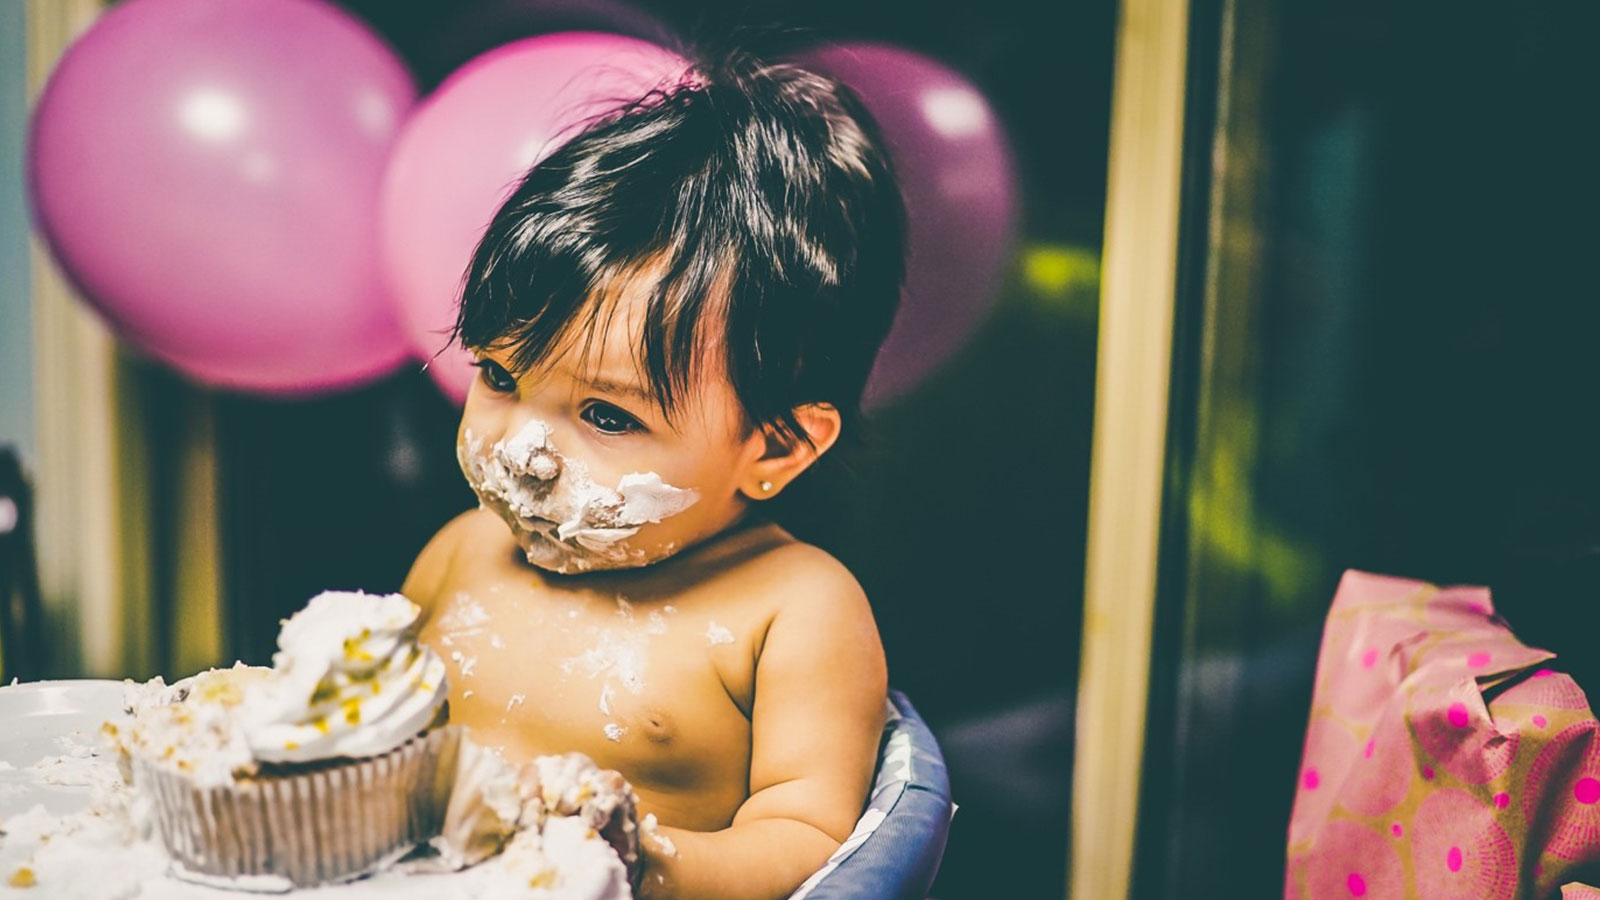 Childhood obesity Thought Piece. A photo of a baby eating a cake.